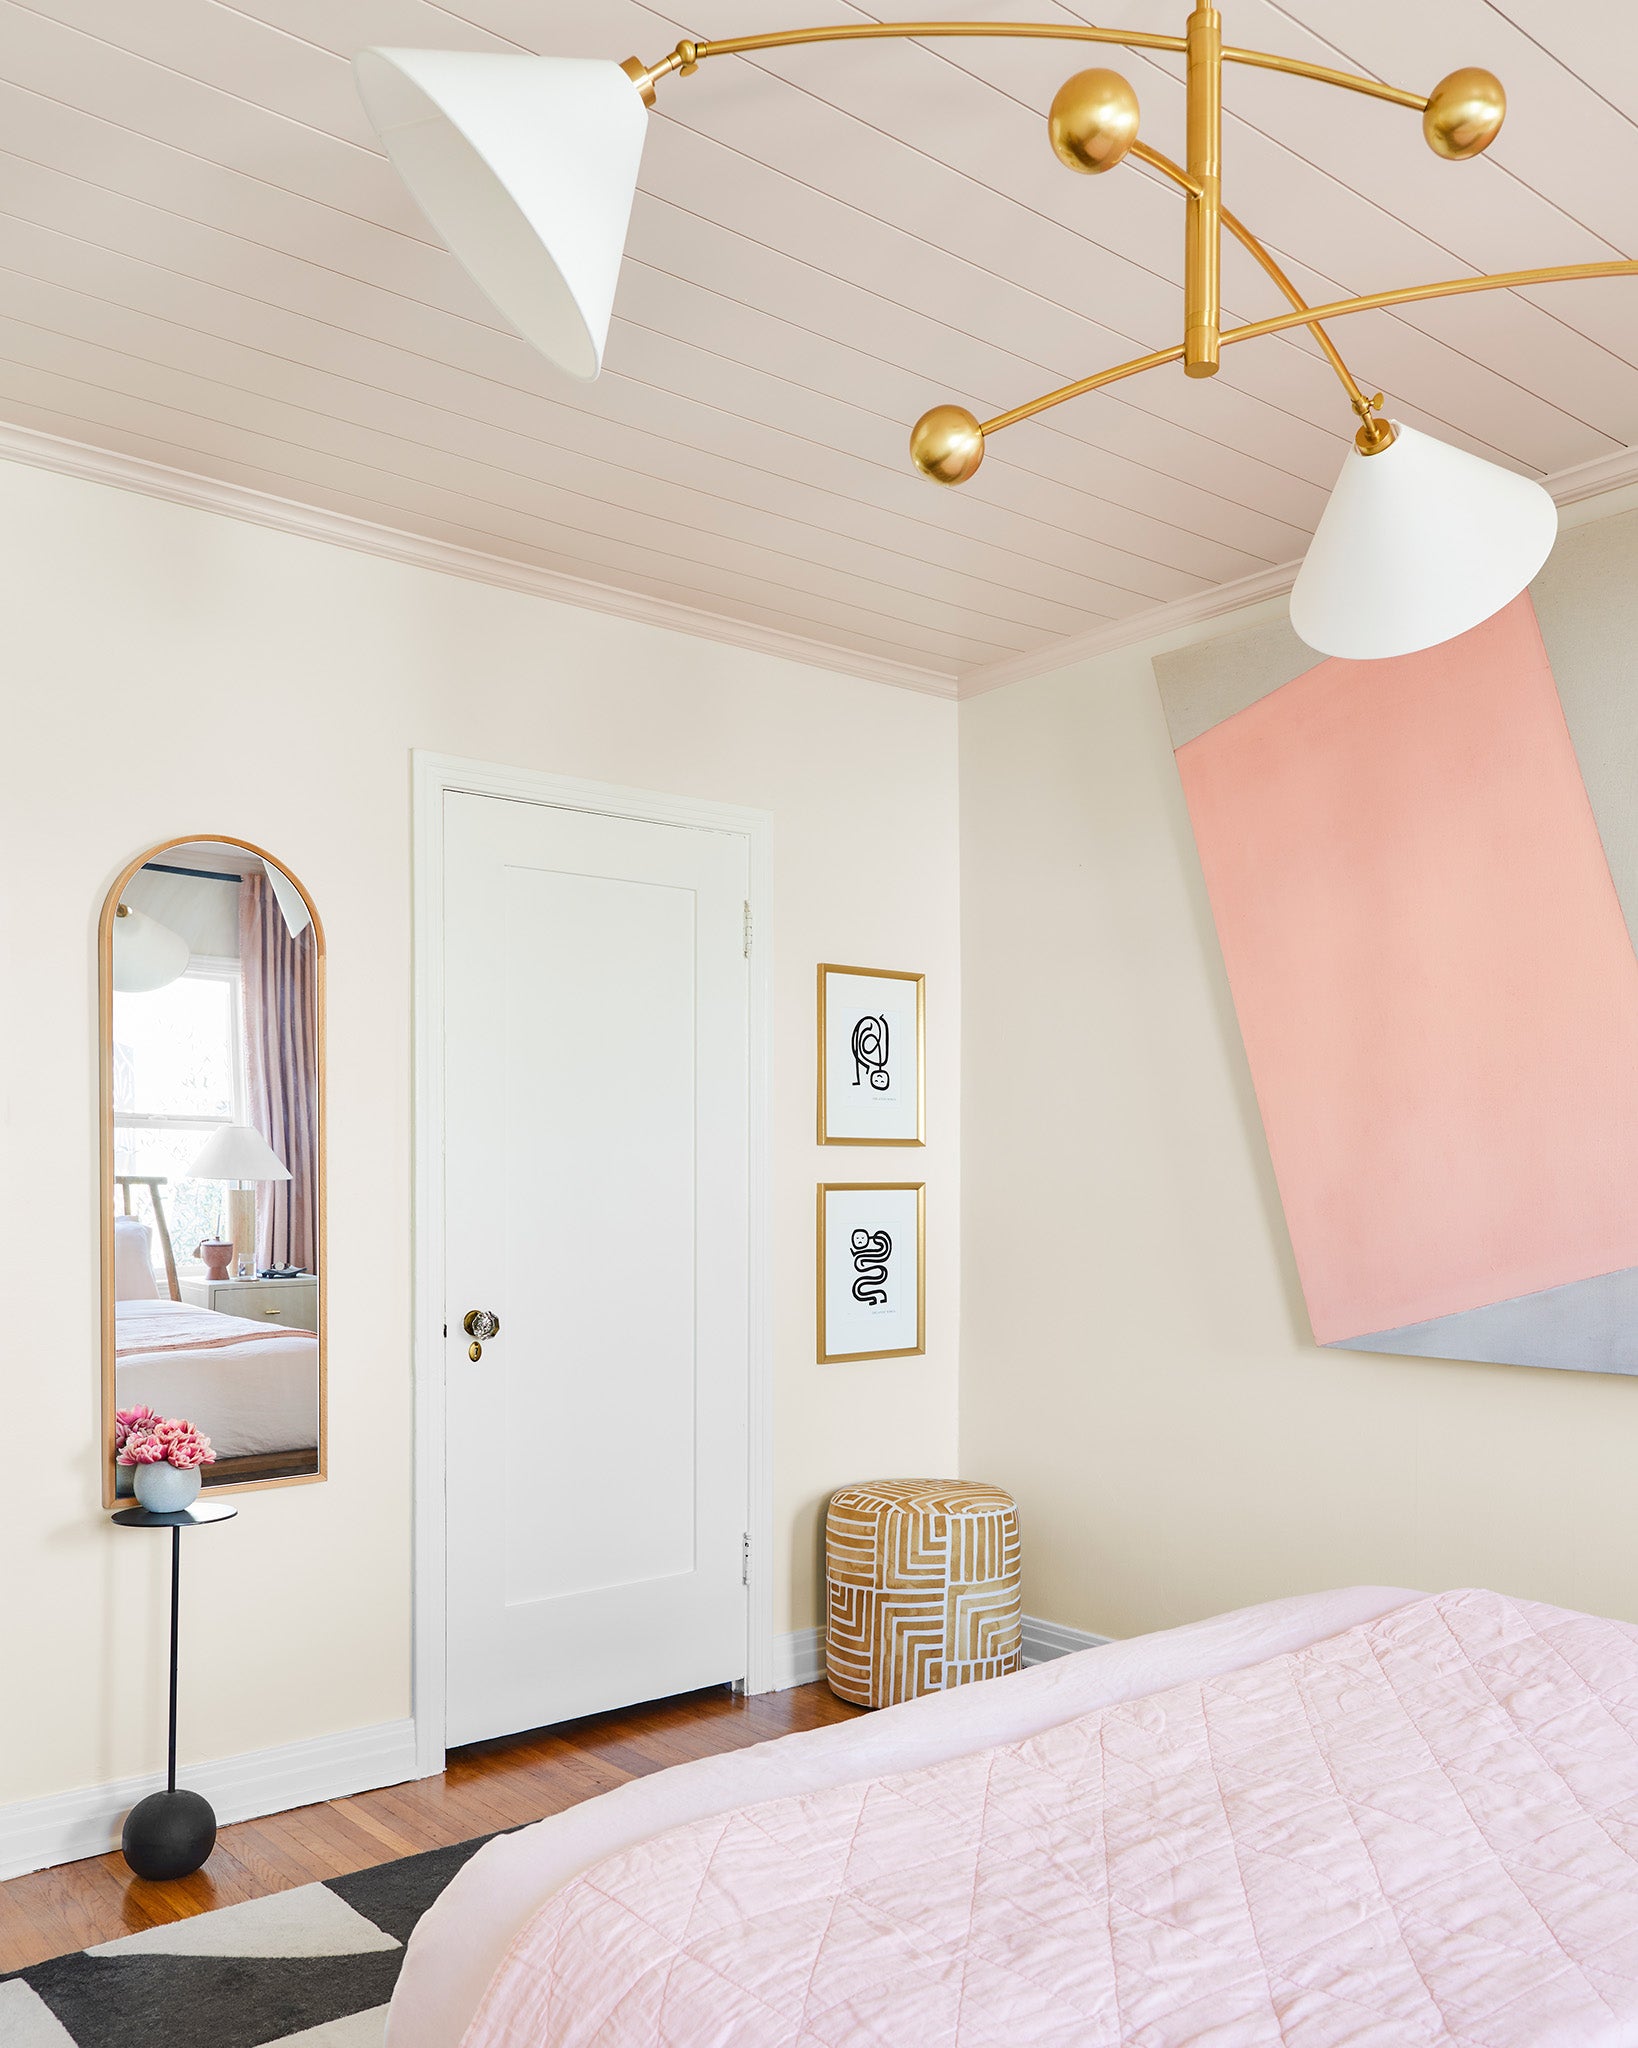 Painting the ceiling an unexpected color, like pale pink, adds interest without overwhelming.